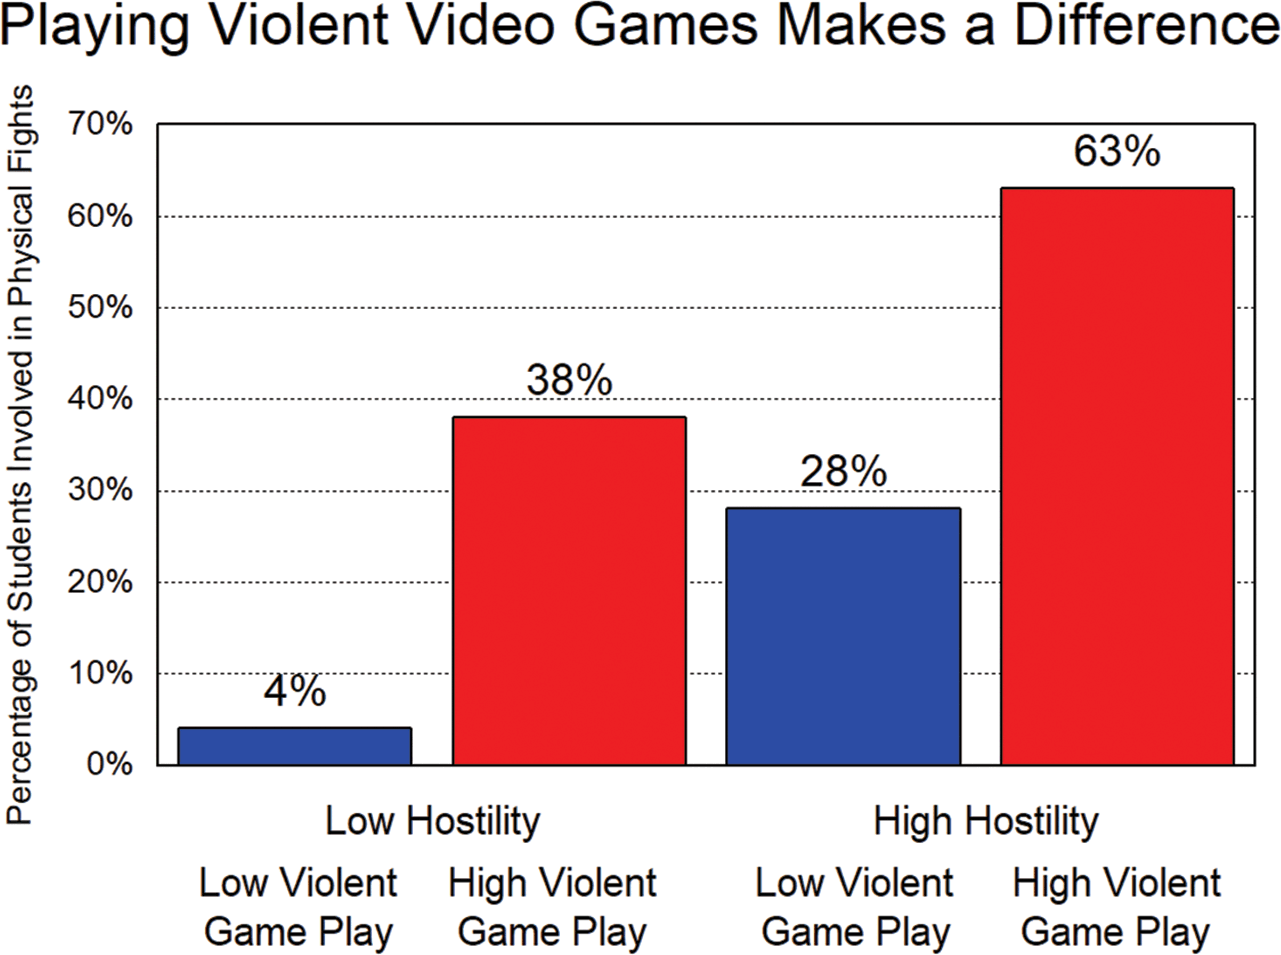 Gaming does not appear harmful to mental health, unless the gamer can't  stop - Oxford study